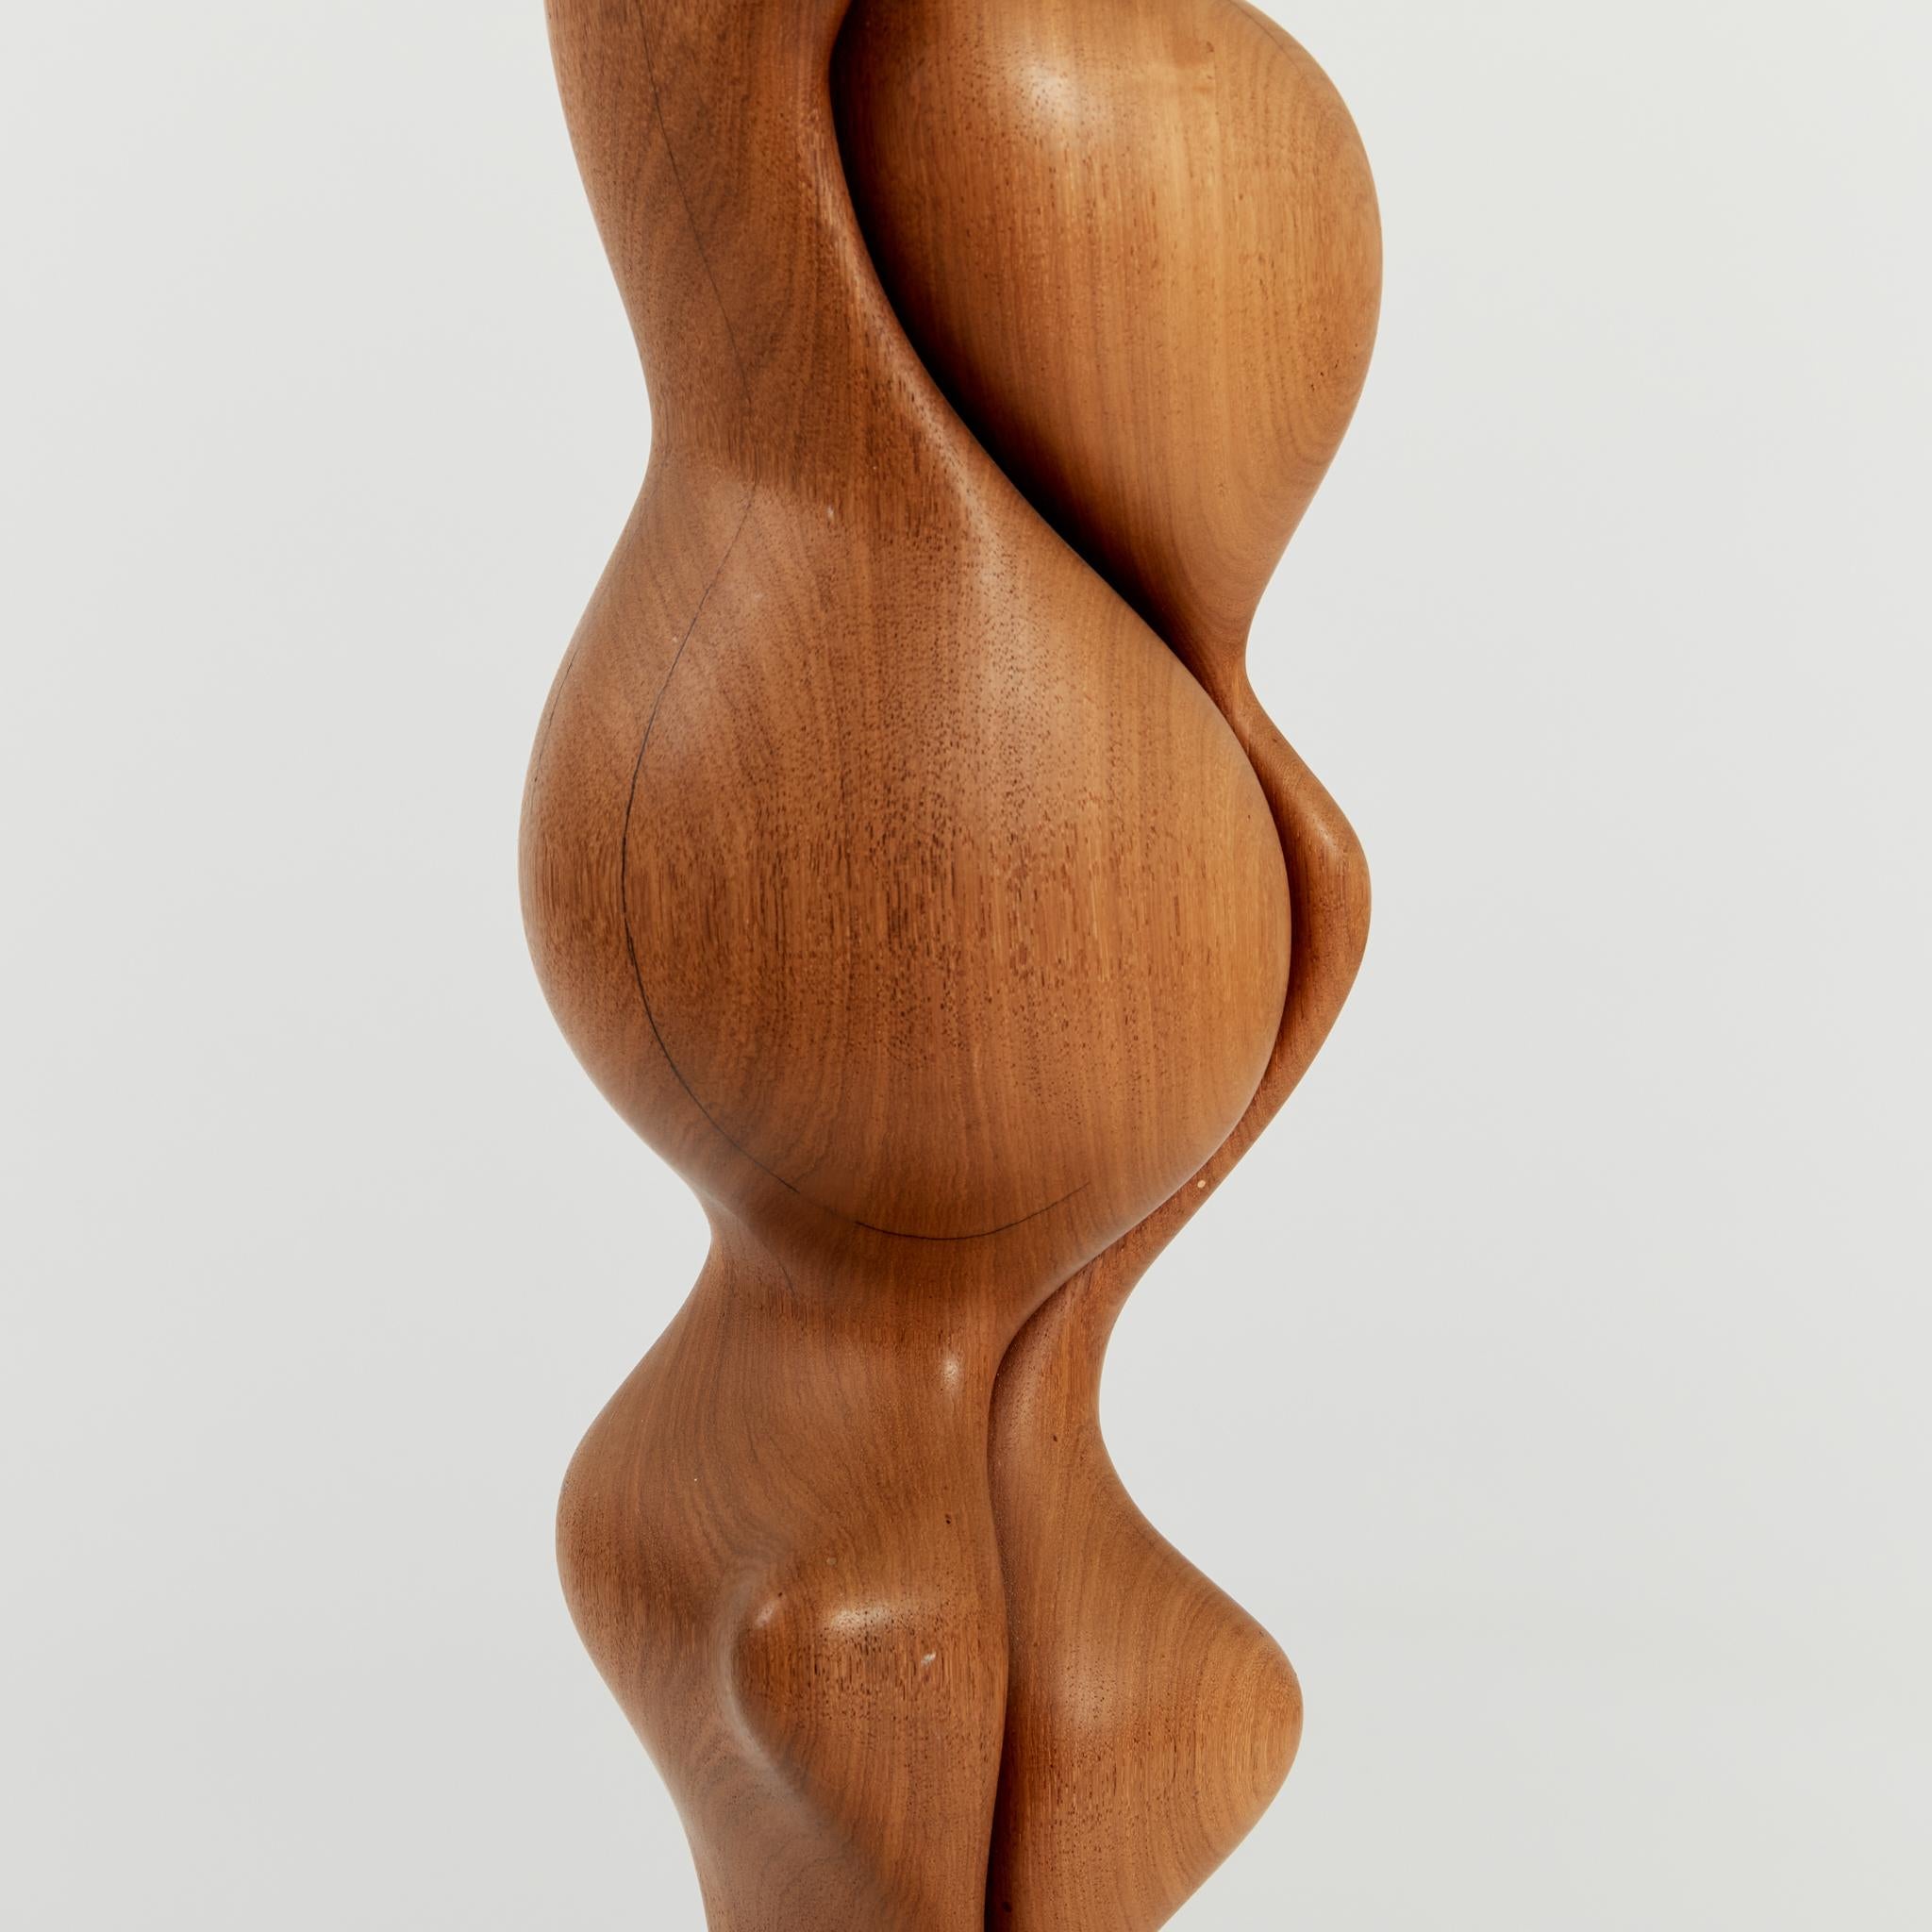 Tall Biomorphic Wood Floor Sculpture with Concrete Plinth 7